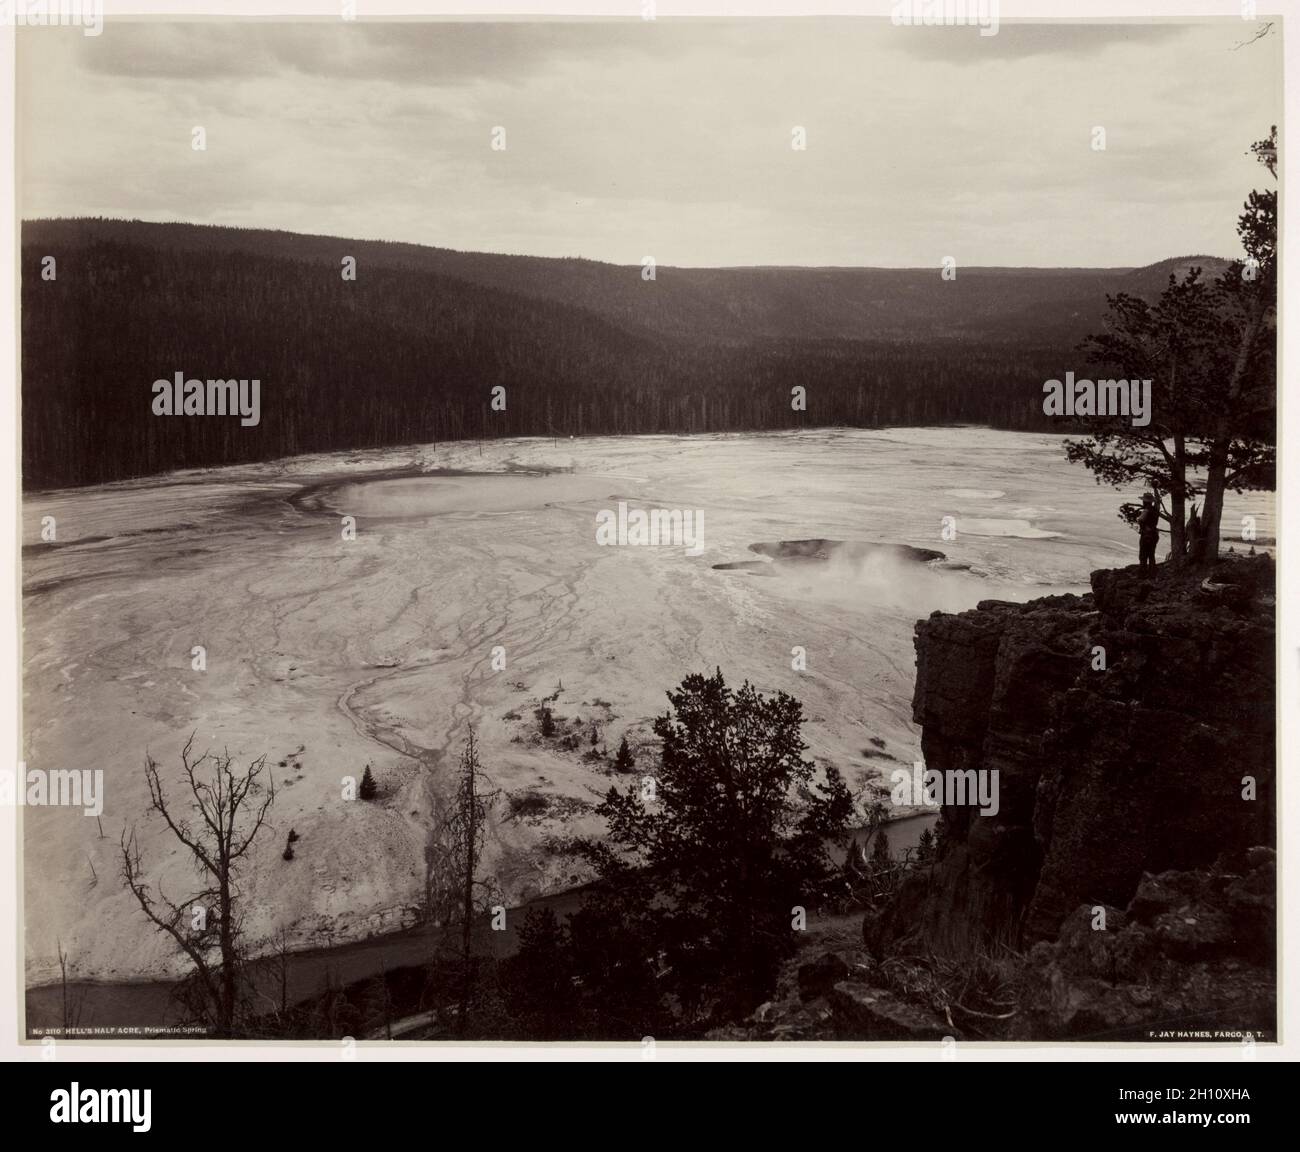 Hell's Half Acre, Prismatic Springs, c. late 1880s. Frank Jay Haynes (American, 1853-1921). Albumen print from glass negative; image: 44.7 x 54.5 cm (17 5/8 x 21 7/16 in.); paper: 45 x 55.1 cm (17 11/16 x 21 11/16 in.); matted: 61 x 76.2 cm (24 x 30 in.). Stock Photo